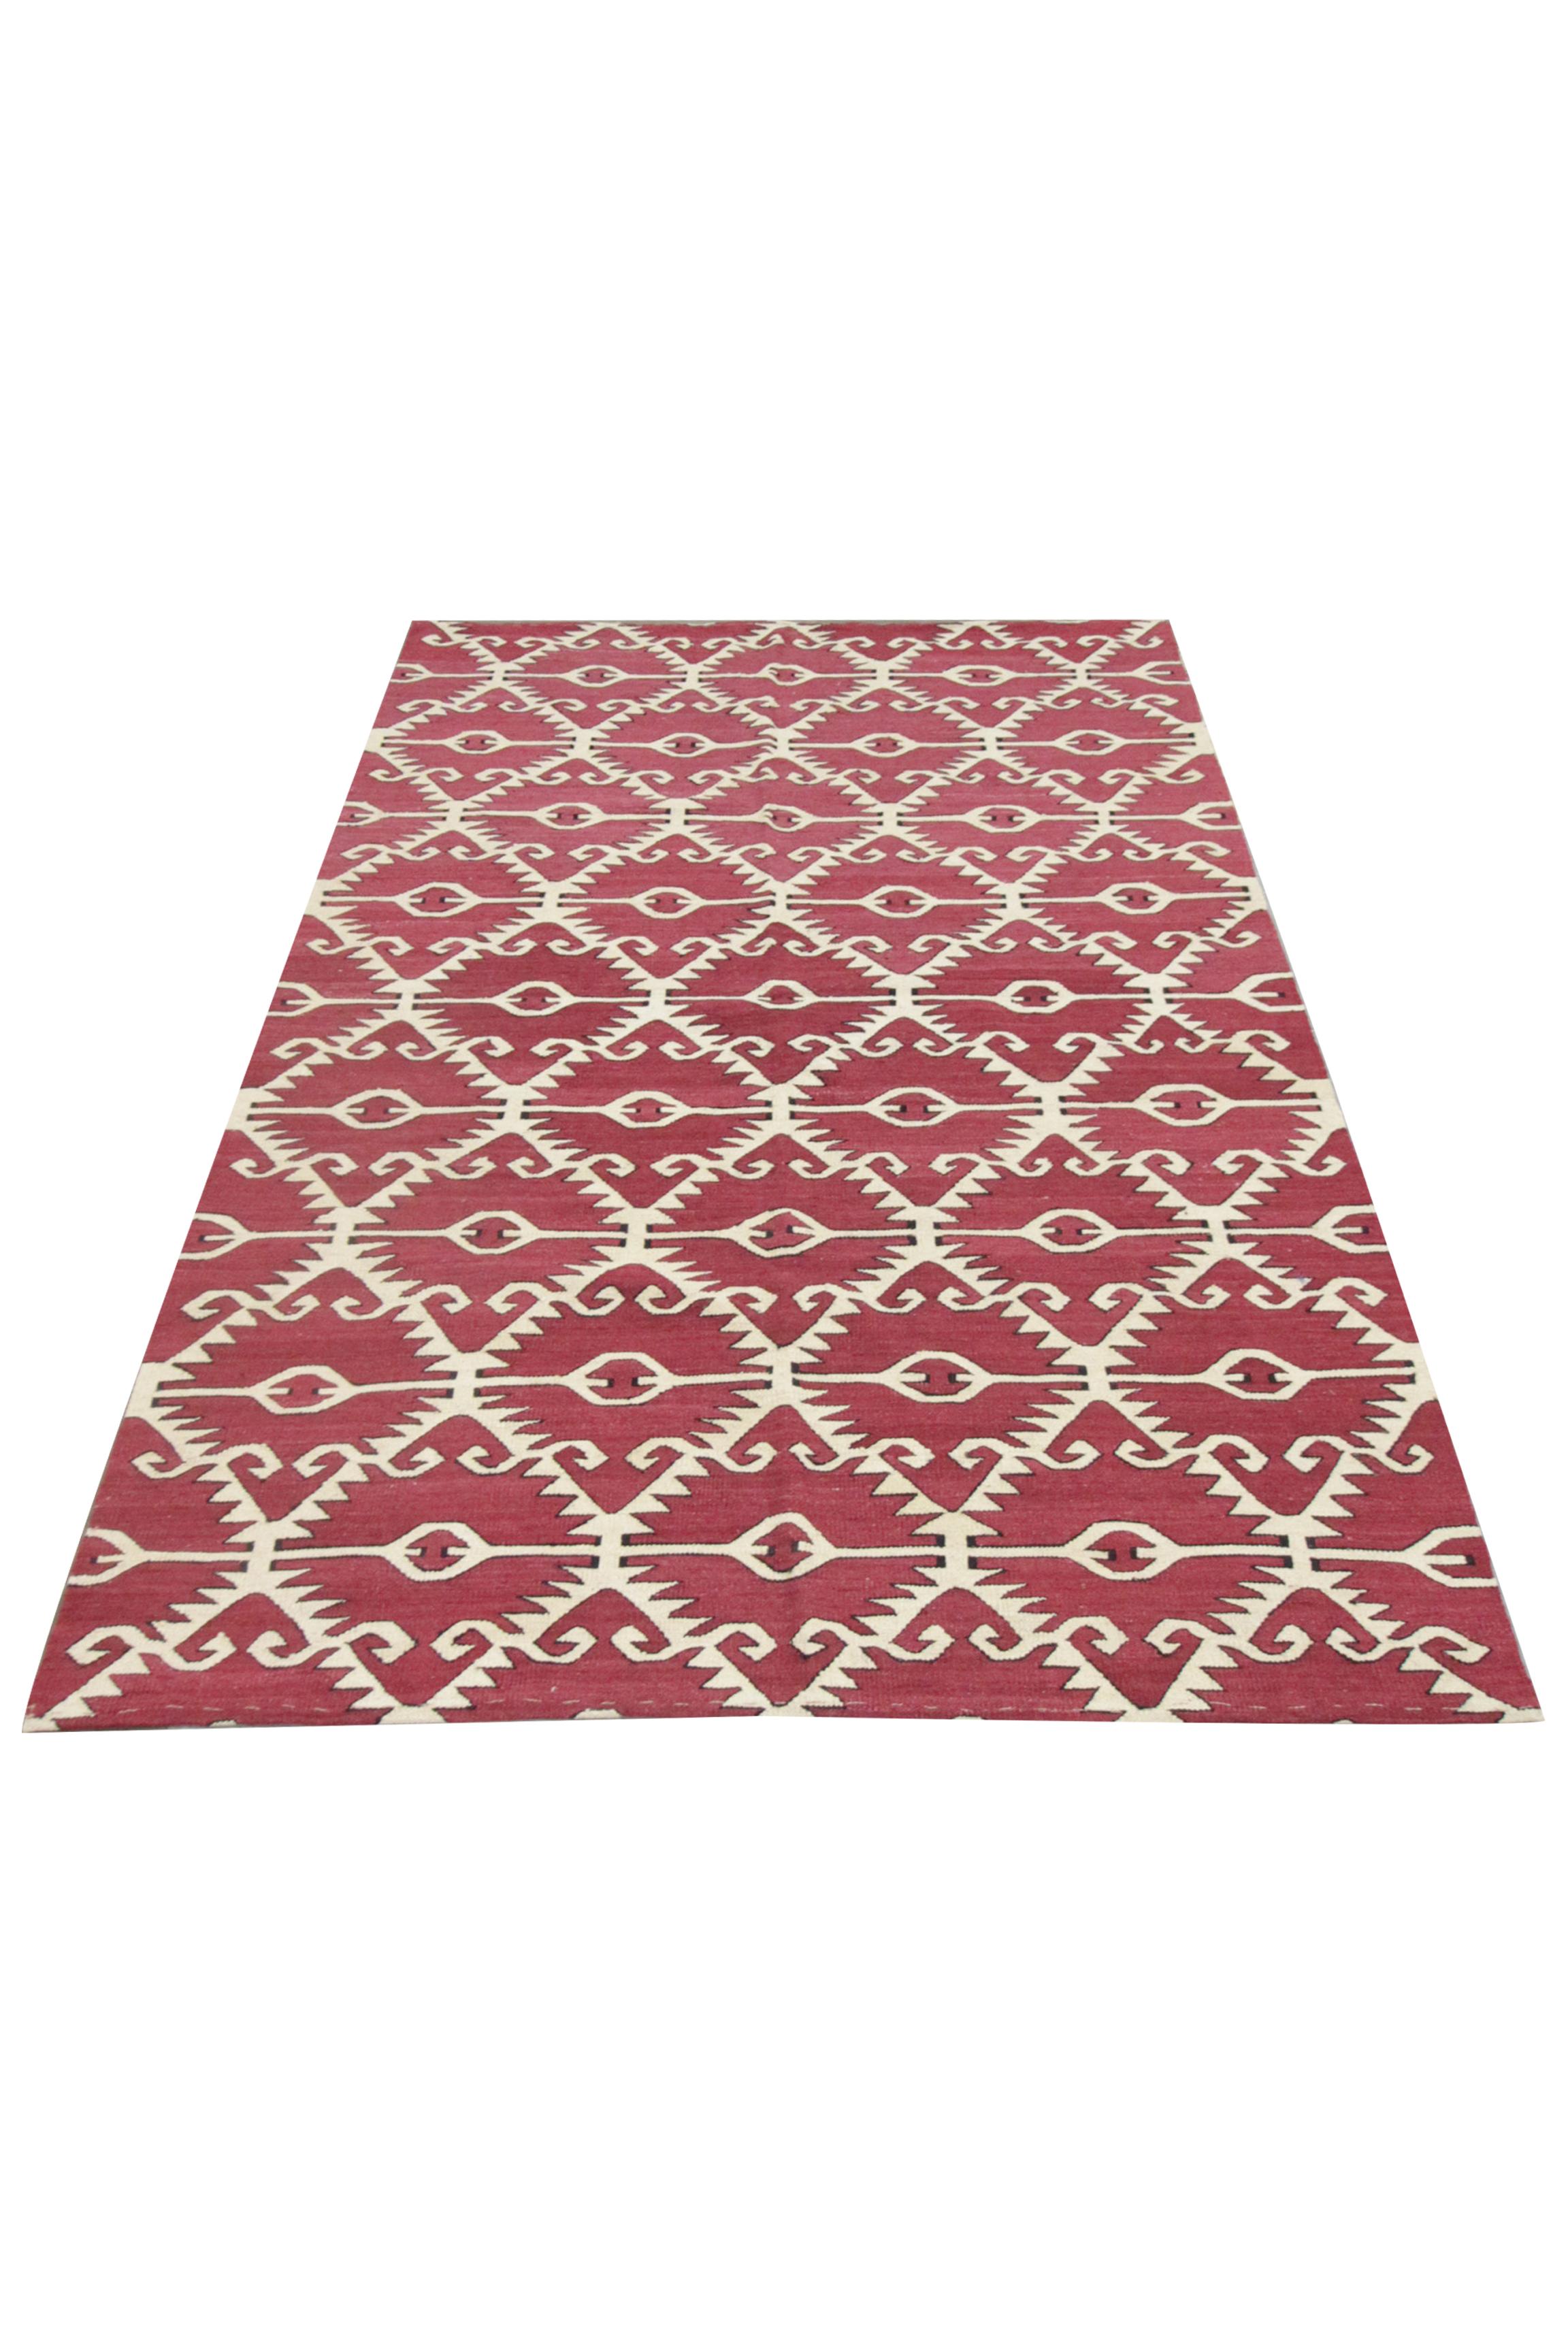 This fine wool area rug is a handwoven modern Kilim. The bold design has been woven with a simple colour palette of cream and red with gentle black accents. The pattern is an all-over repeating design with hooks and diamonds. 
Kilim rugs are woven